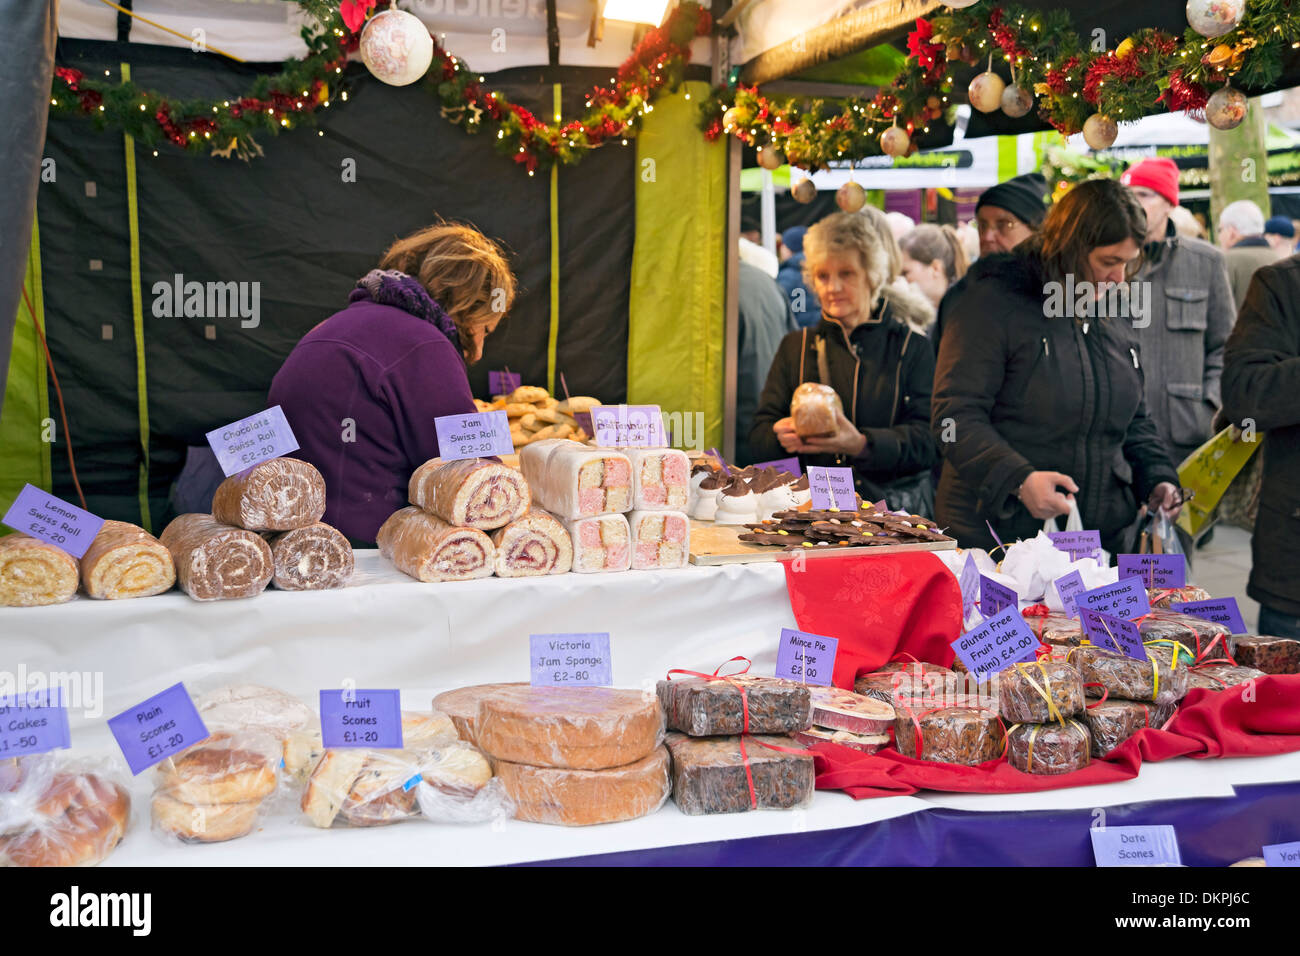 People tourists visitors at stall selling cakes at the Christmas St Nicholas Fayre York North Yorkshire England UK United Kingdom GB Great Britain Stock Photo